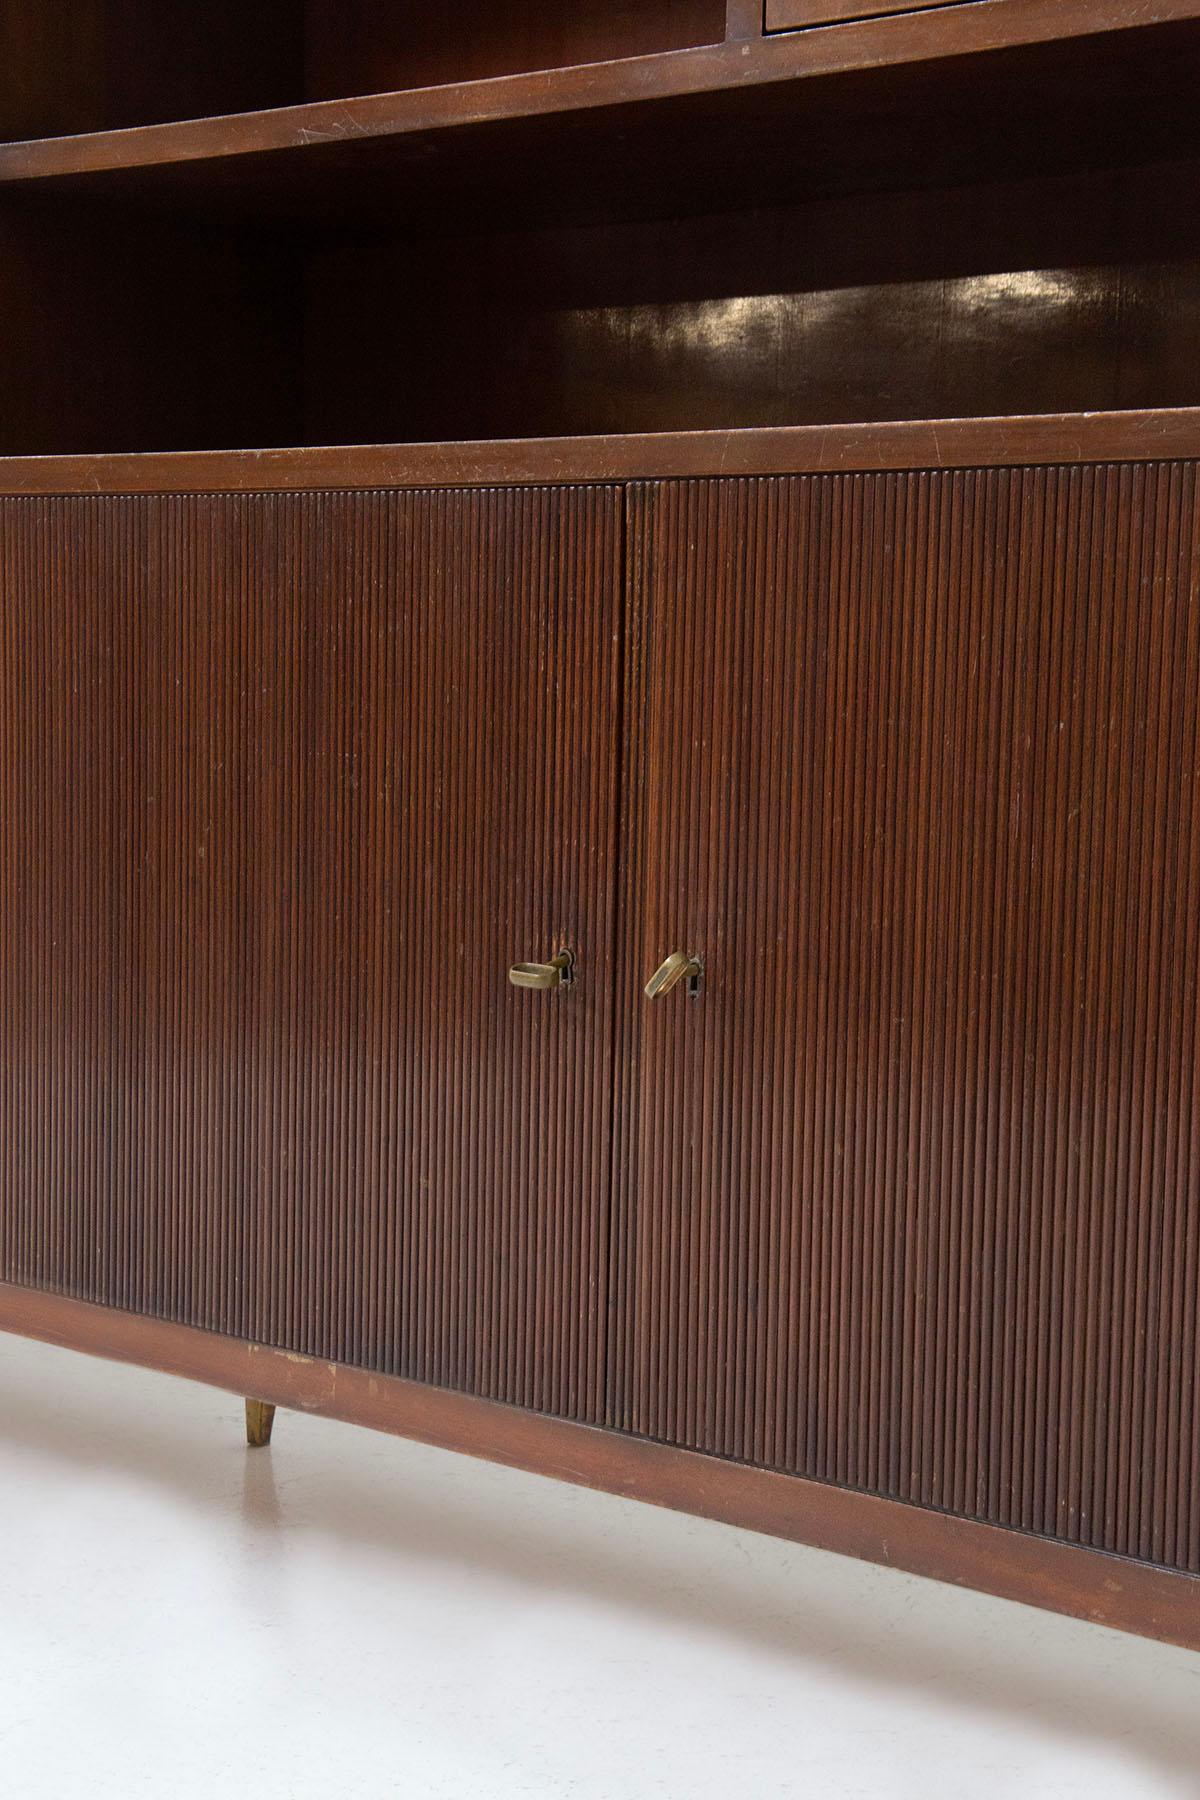 Mid-20th Century Sideboard Bookcase by Dassi Mobili Moderni Attributed to Gio Ponti